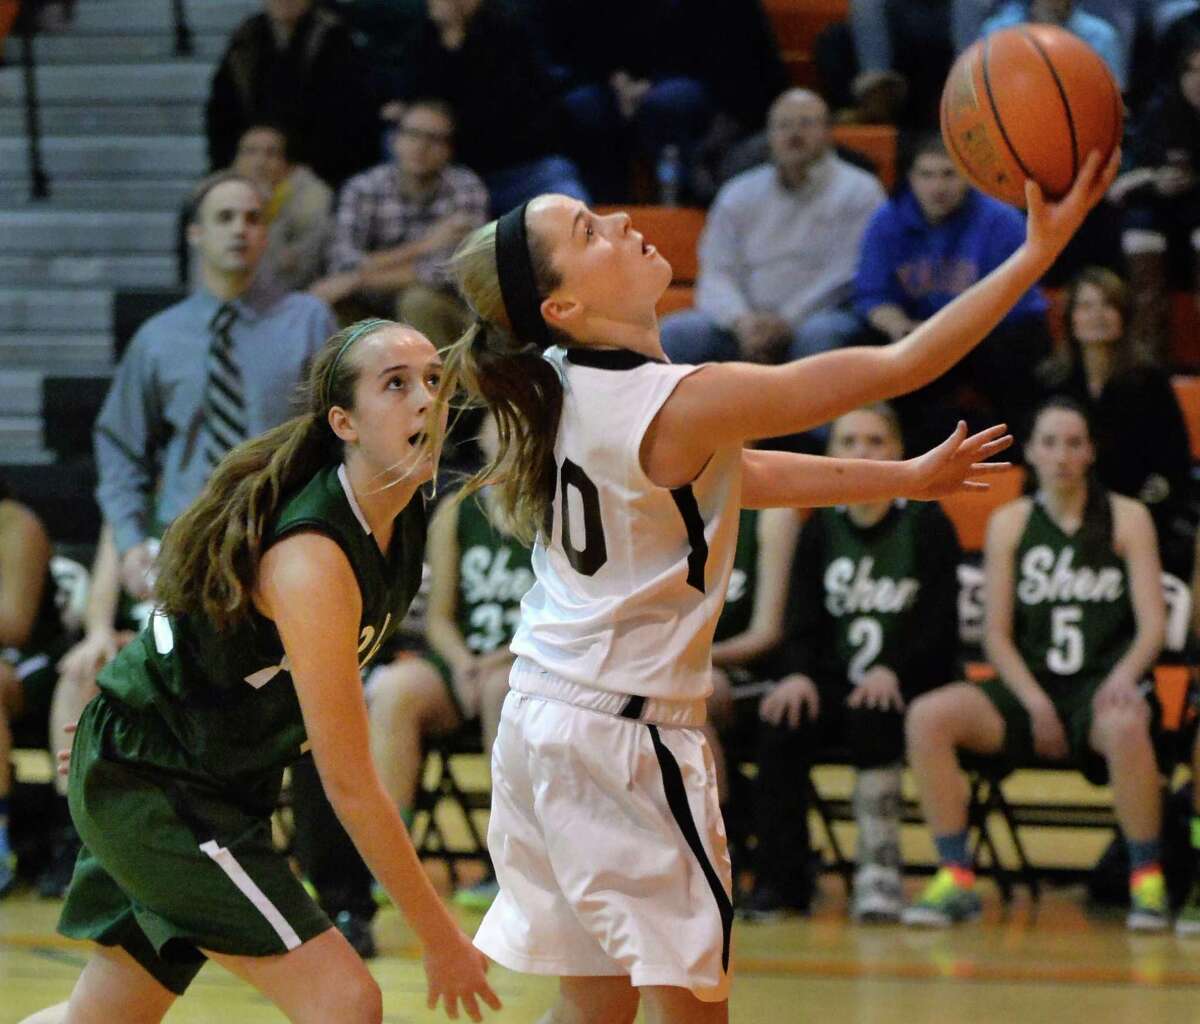 Bethlehem's #30 Emily Wander, right, gets past Shen's #32 Carly Boland on her way to the basket during Friday's game at Bethlehem High Dec. 12, 2014, in Delmar, NY. (John Carl D'Annibale / Times Union)